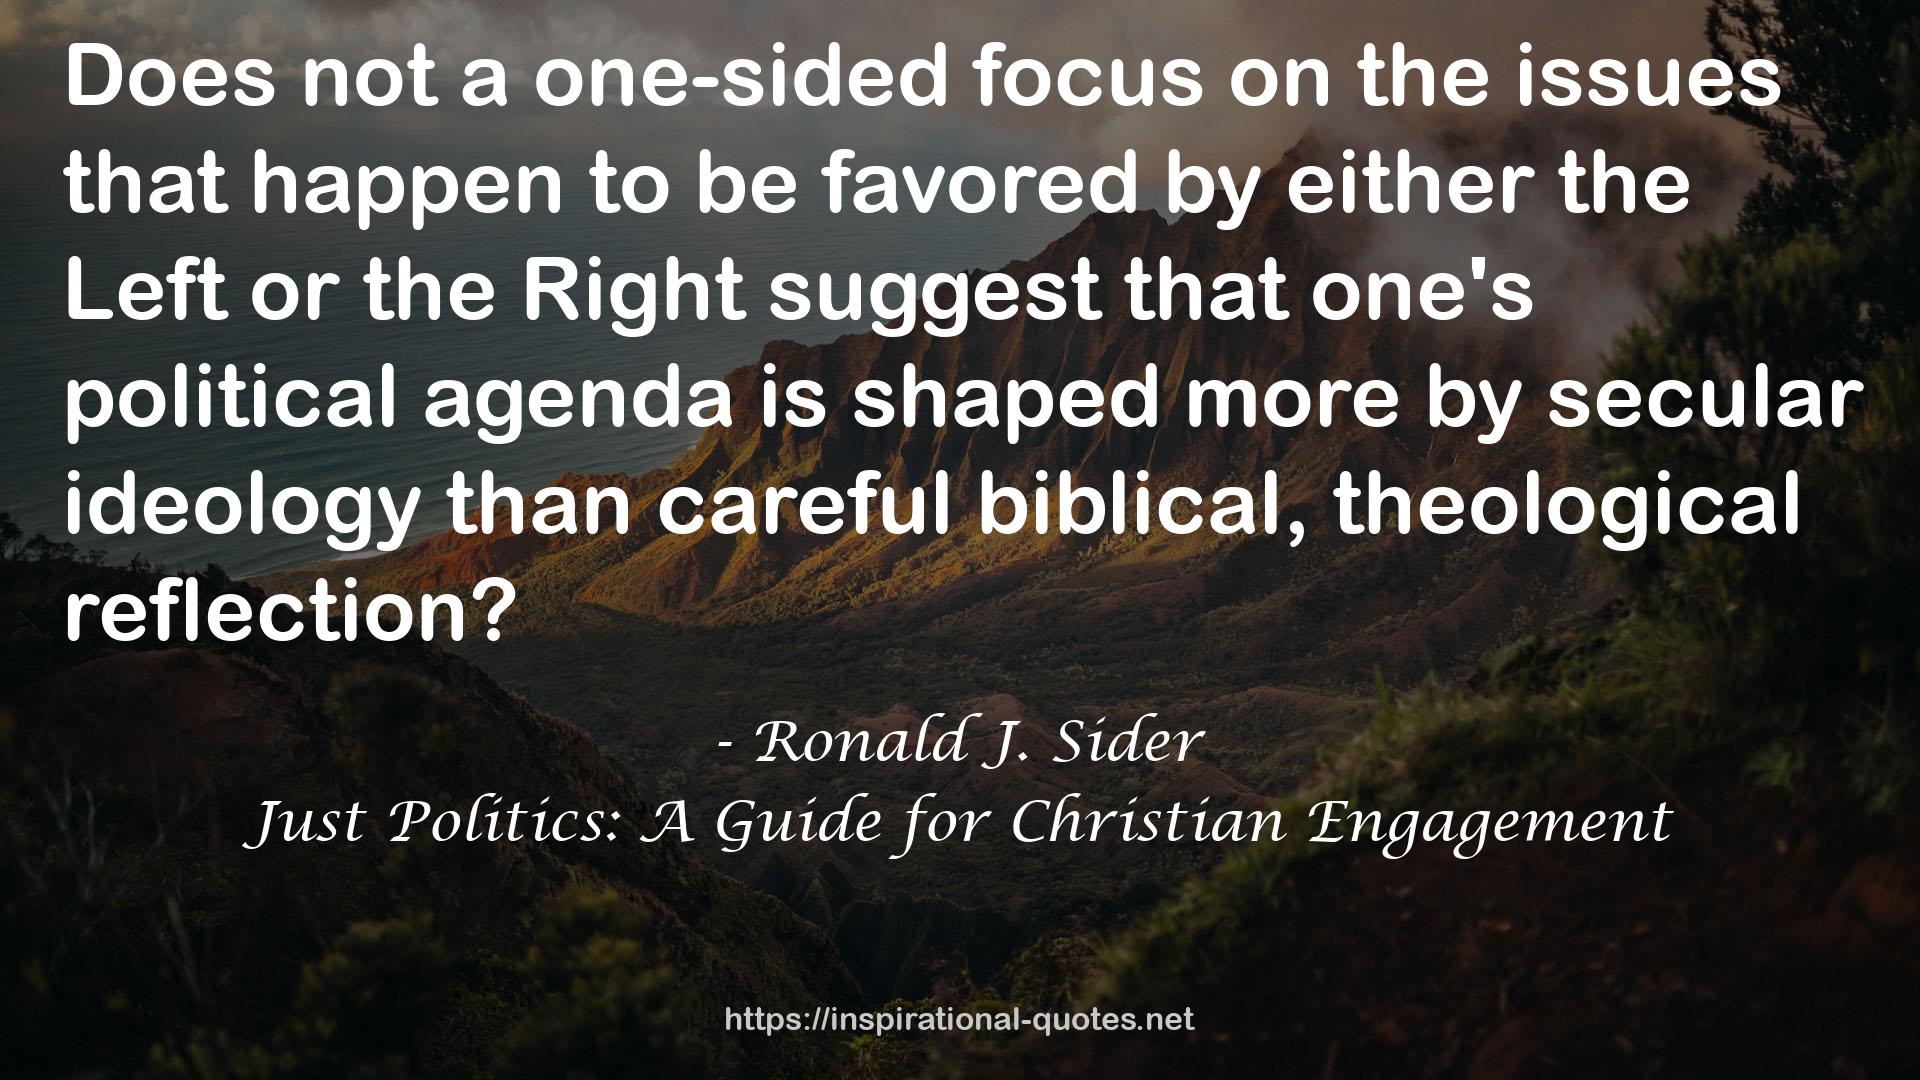 Just Politics: A Guide for Christian Engagement QUOTES